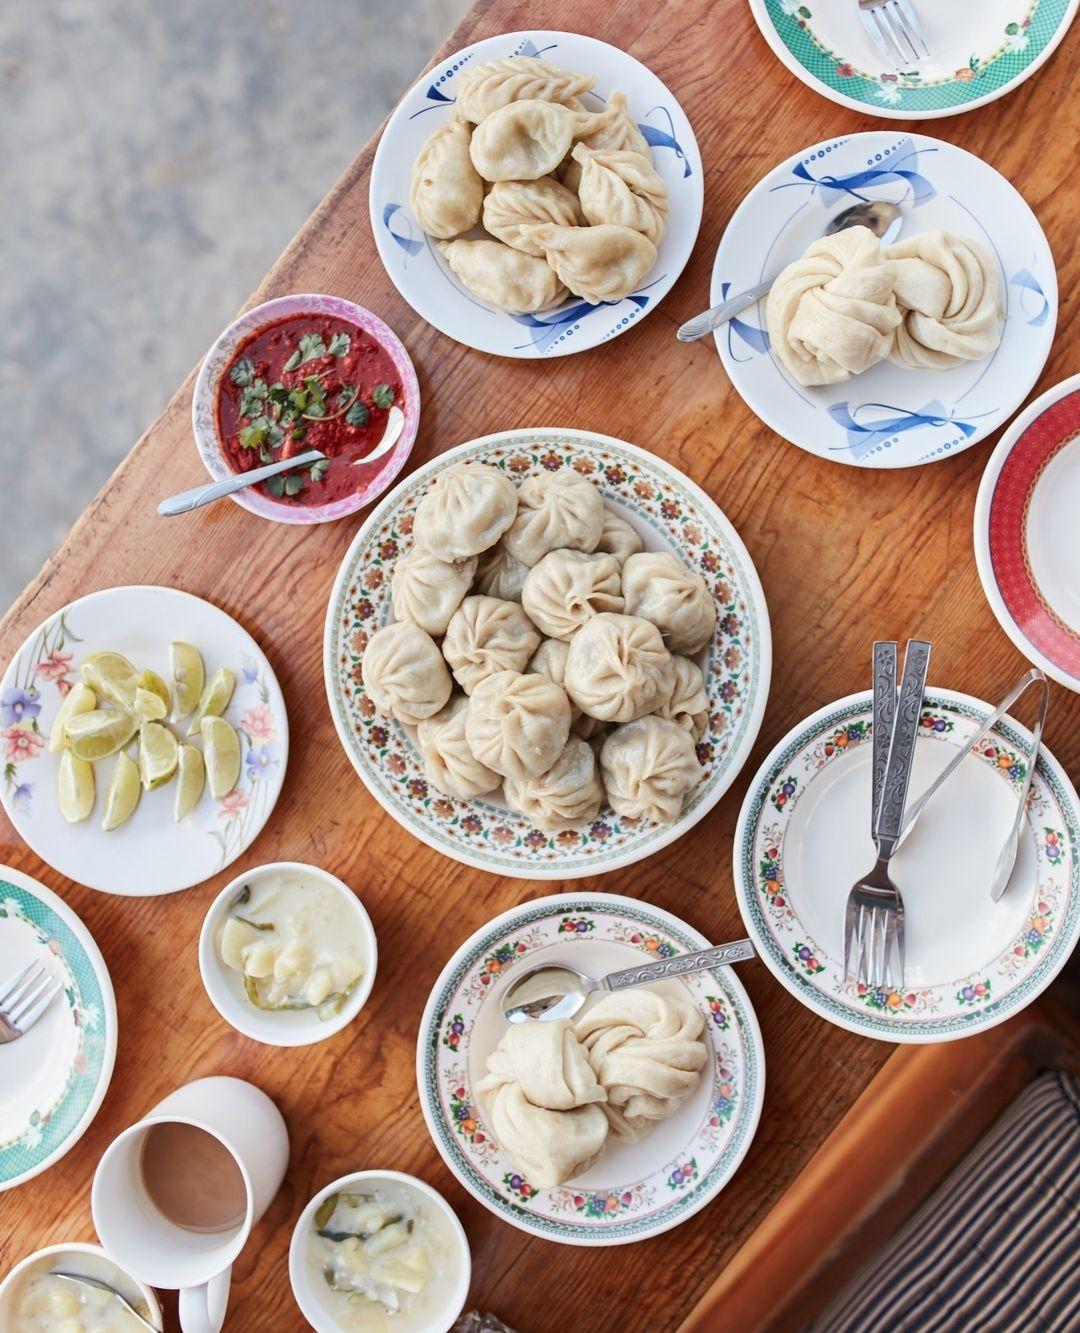 class="content__text"
 Some of my favourite dishes in Bhutan that we will be trying on the Bhutan for Foodie tour in July. ⁠
⁠
🥟 Momos - lots of different varieties, they are a Himalayan style dumplings filled with either cheese and onion, minced buffalo meat, maybe potato, sometimes chicken wrapped in pastry then steamed. I love them!⁠
⁠
🌶️ Chilli Chop – a large whole chilli battered and deep fried. They are not as spicy as they sound. Be warned, you'll want more than one! ⁠
⁠
🍛 Chicken Curry - a delicious fresh chicken curry (not creamy like other curries you might think of). Ginger, onion and coriander stems elevate the curry base, and we think this is the best curry in the Himalayas. ⁠
⁠
I'm looking forward to sharing these dishes with our fellow travellers in July. For more info on the tour, shoot me a DM or follow the link in my bio. ⁠
⁠ 
 